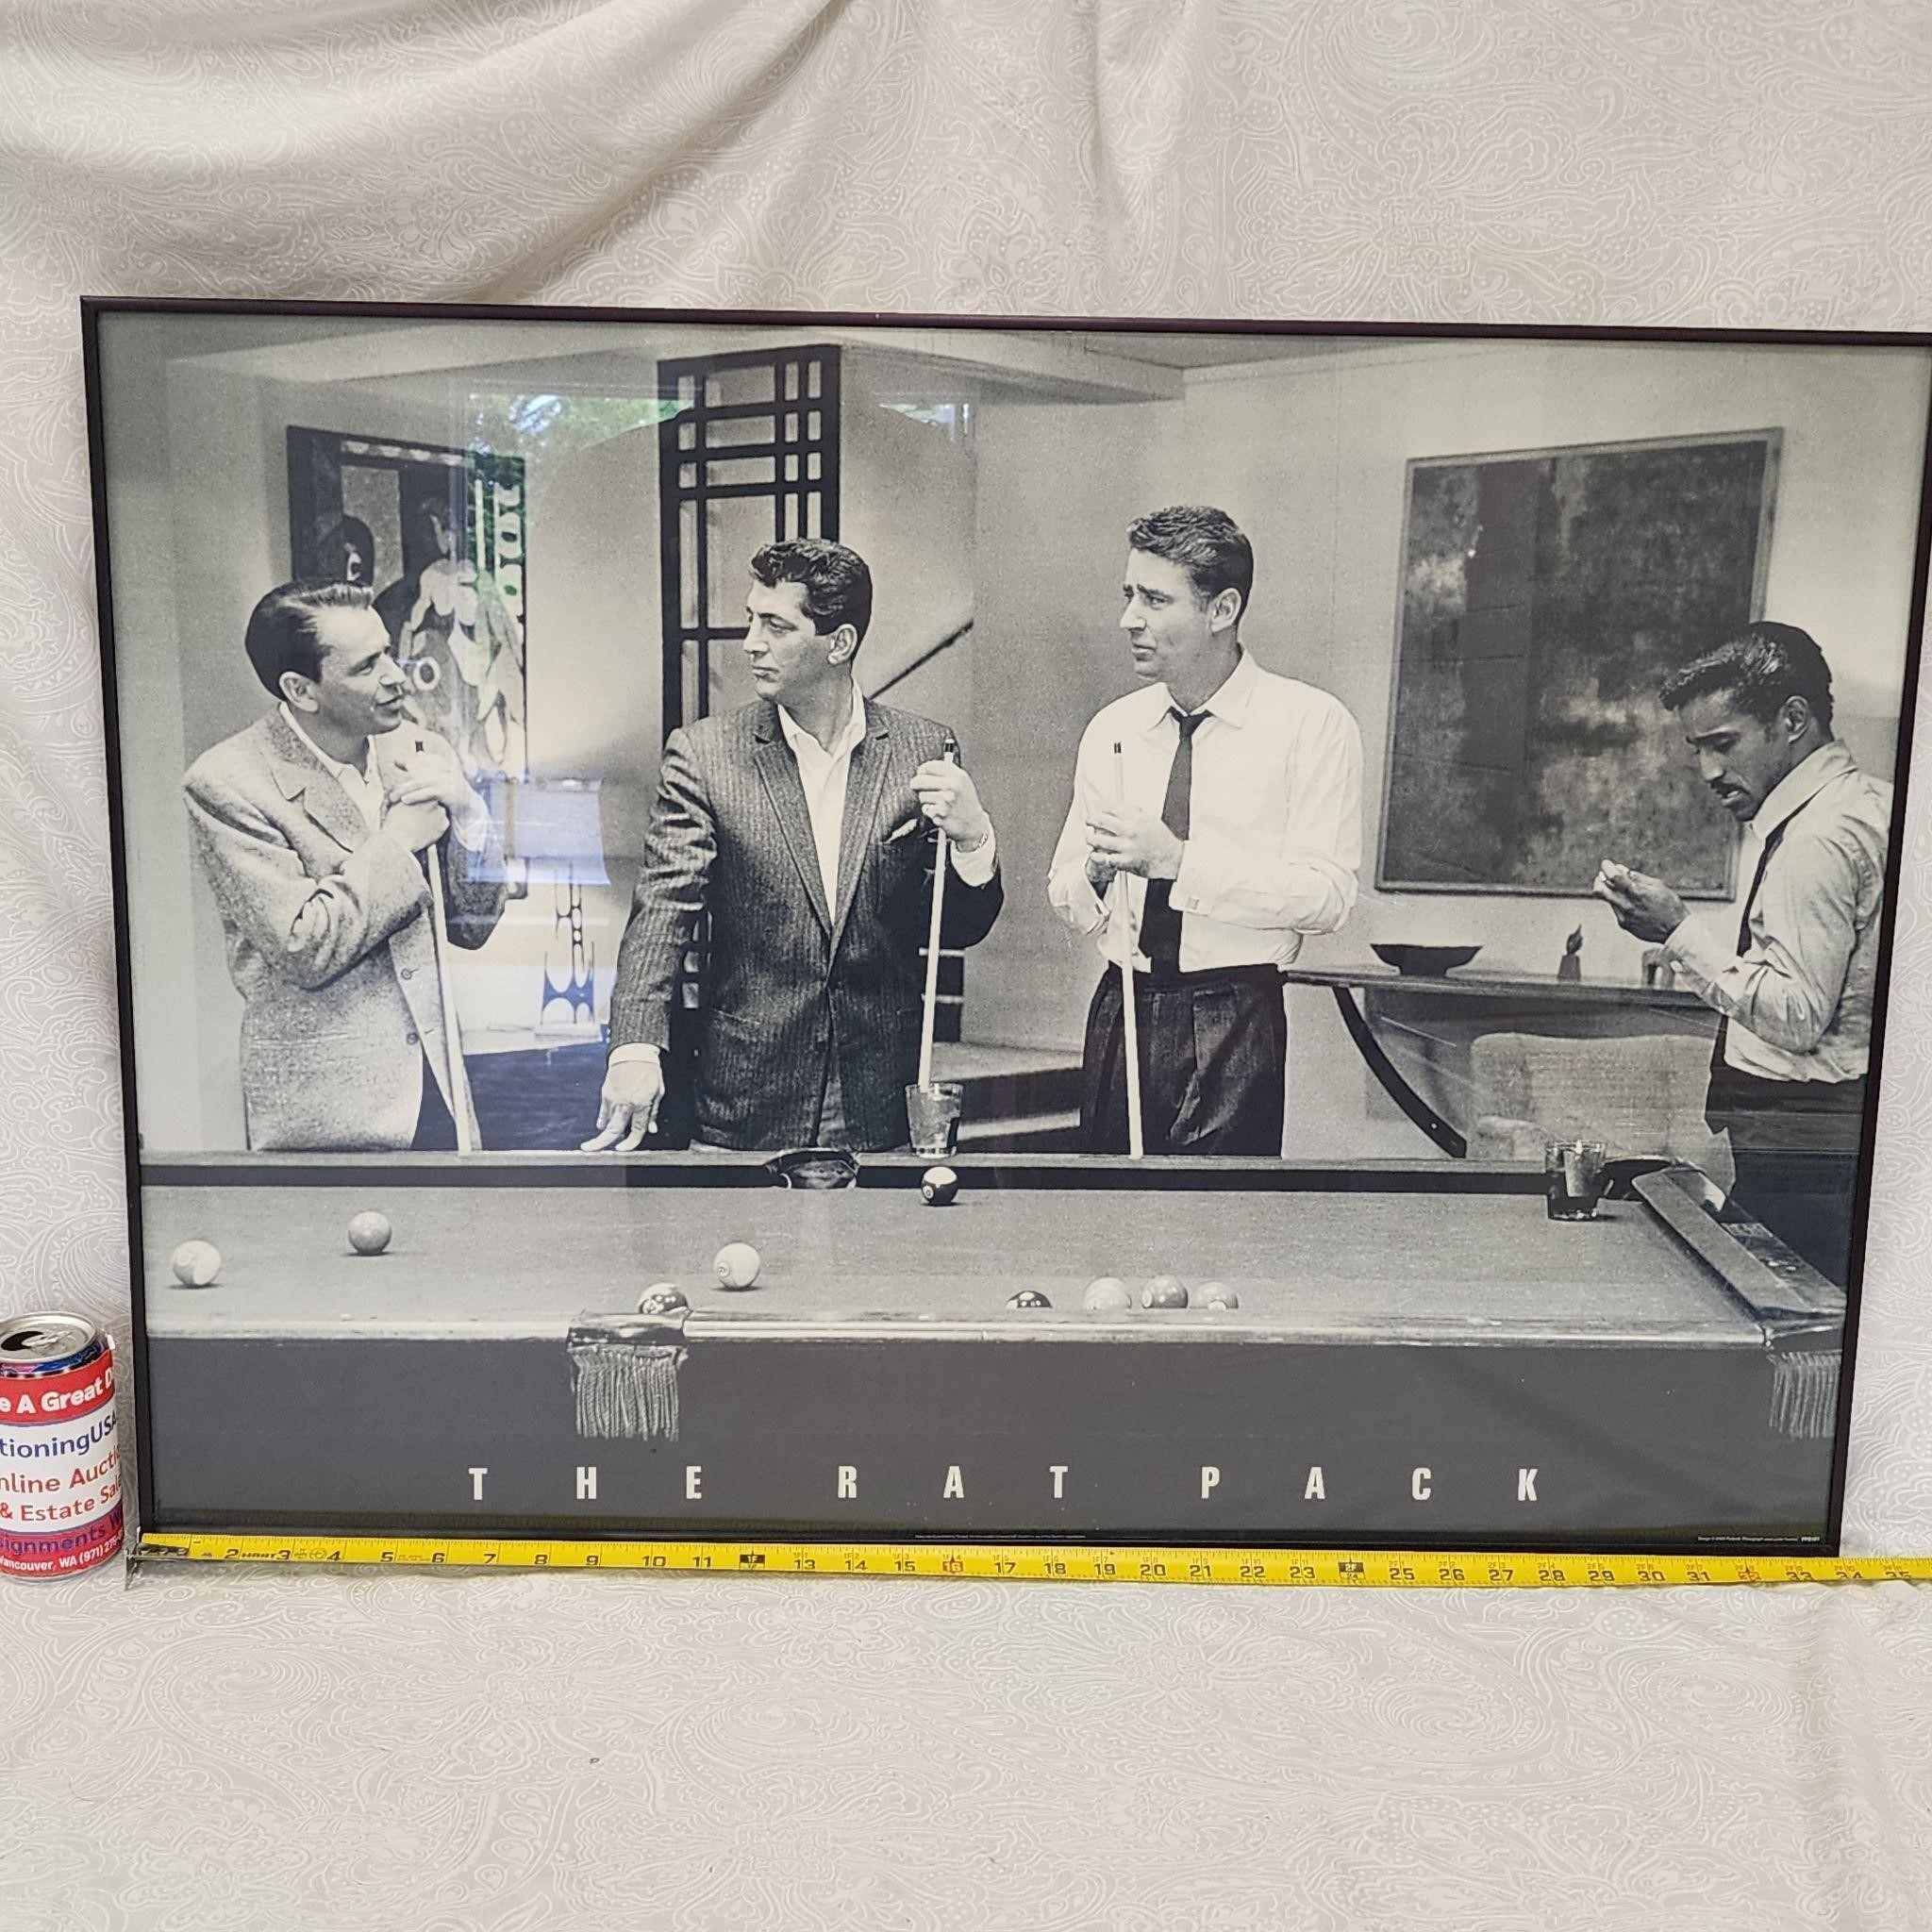 Large Man Cave "The Rat Pack" Art Poster